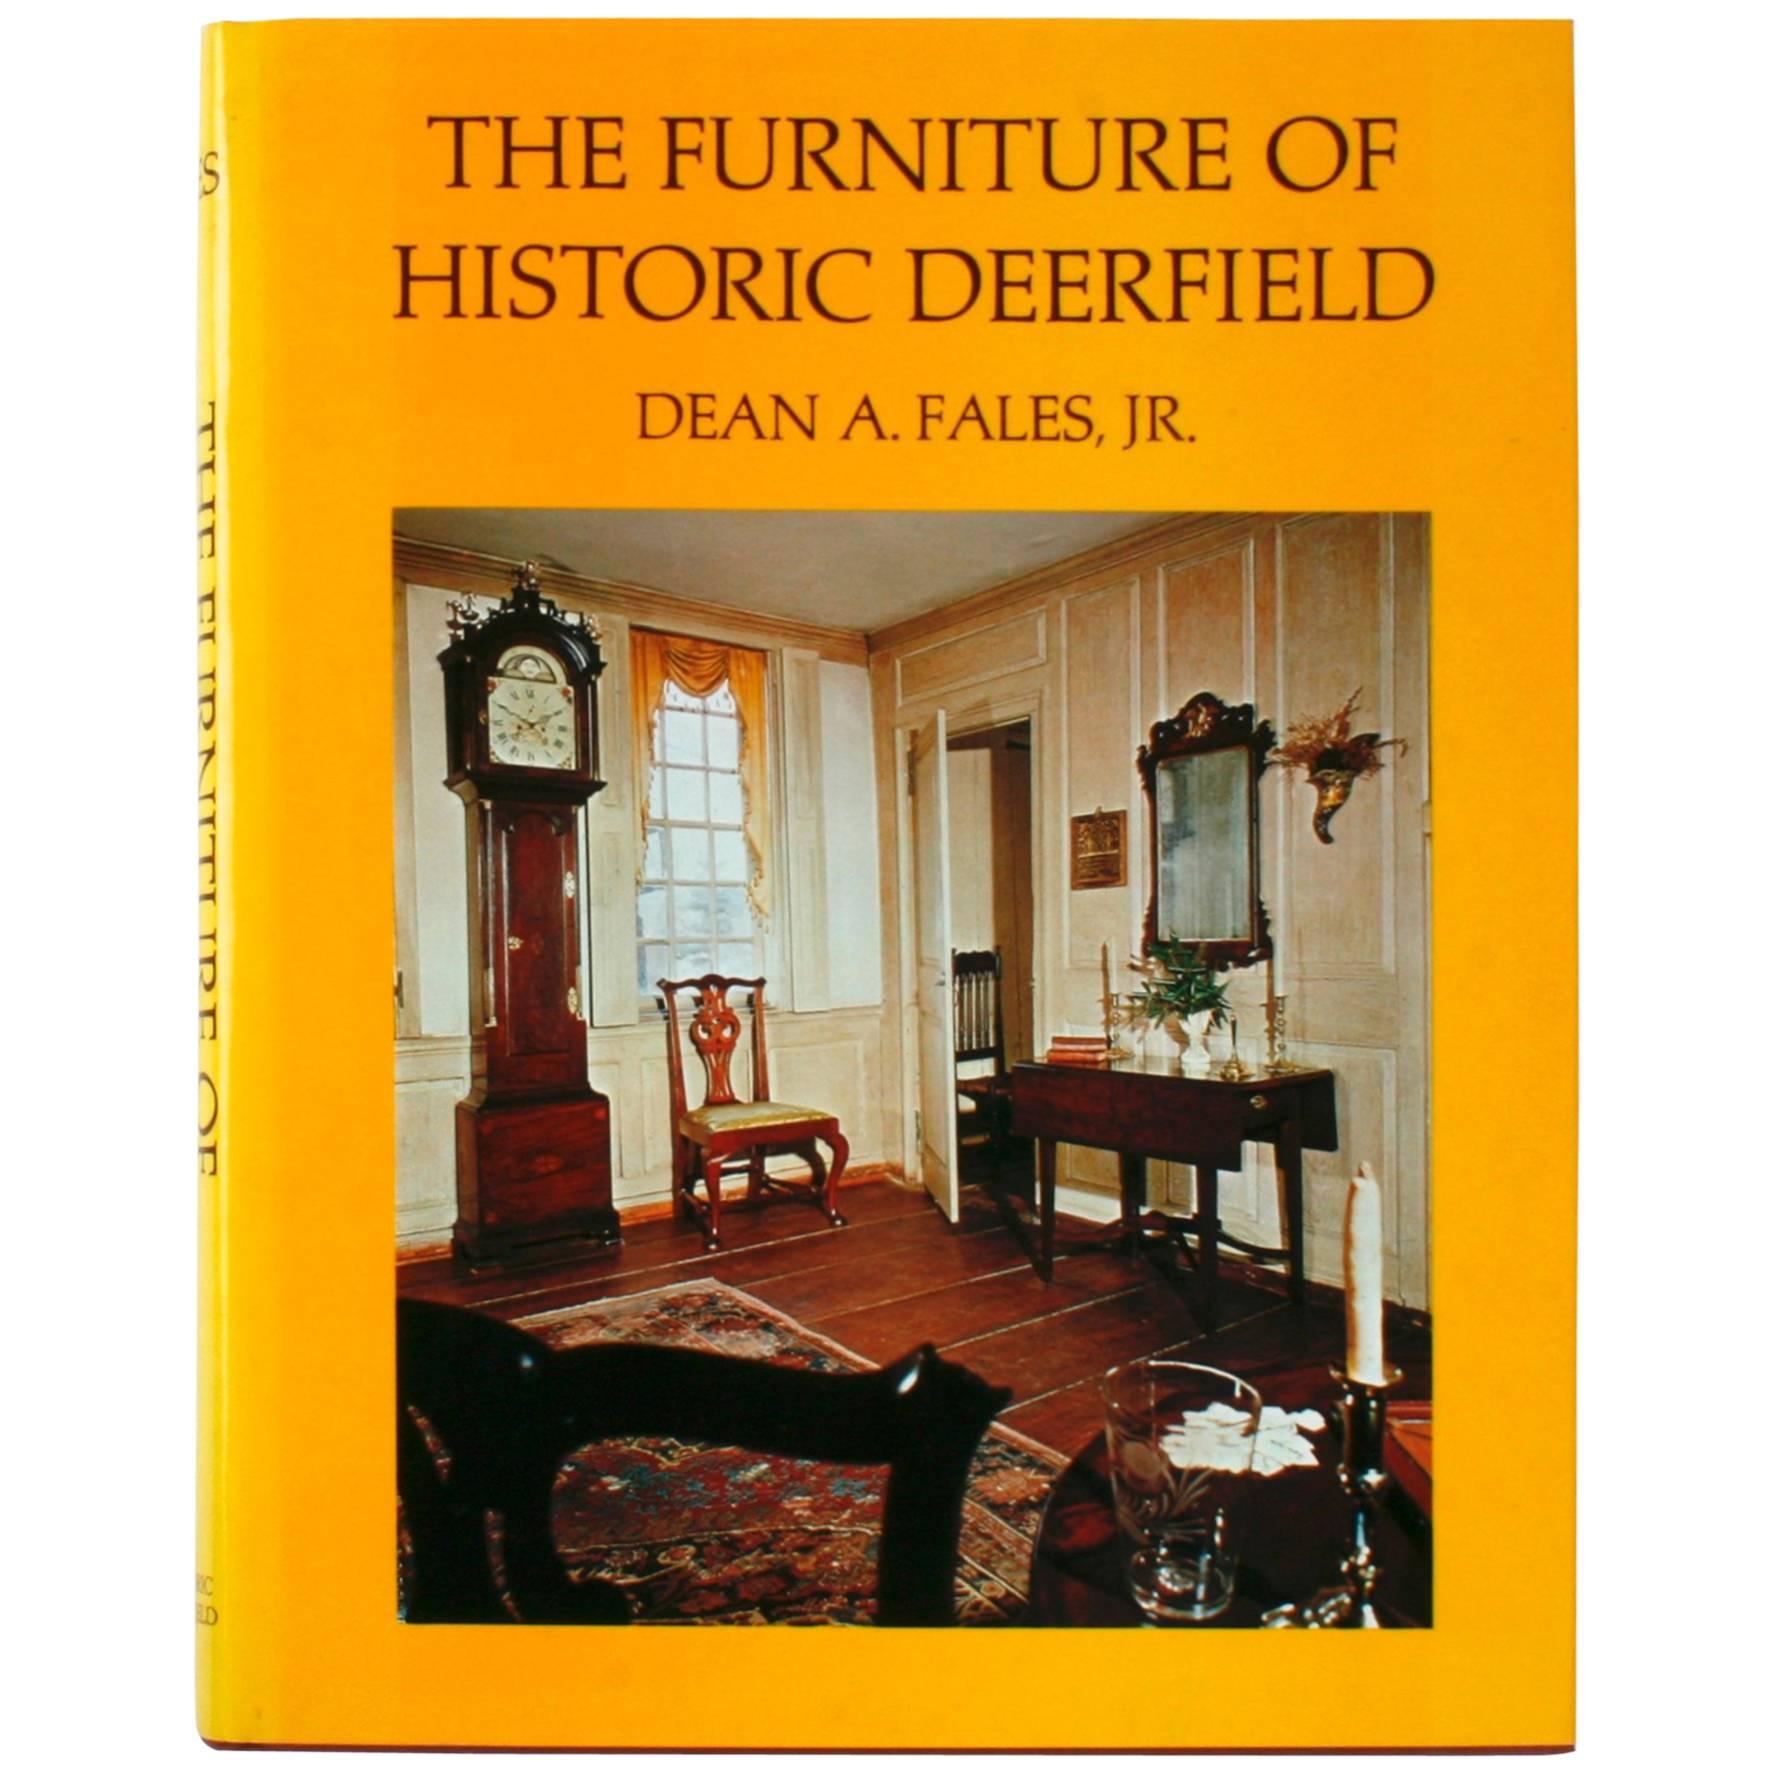 Furniture of Historic Deerfield by Dean A. Fales, Jr. For Sale